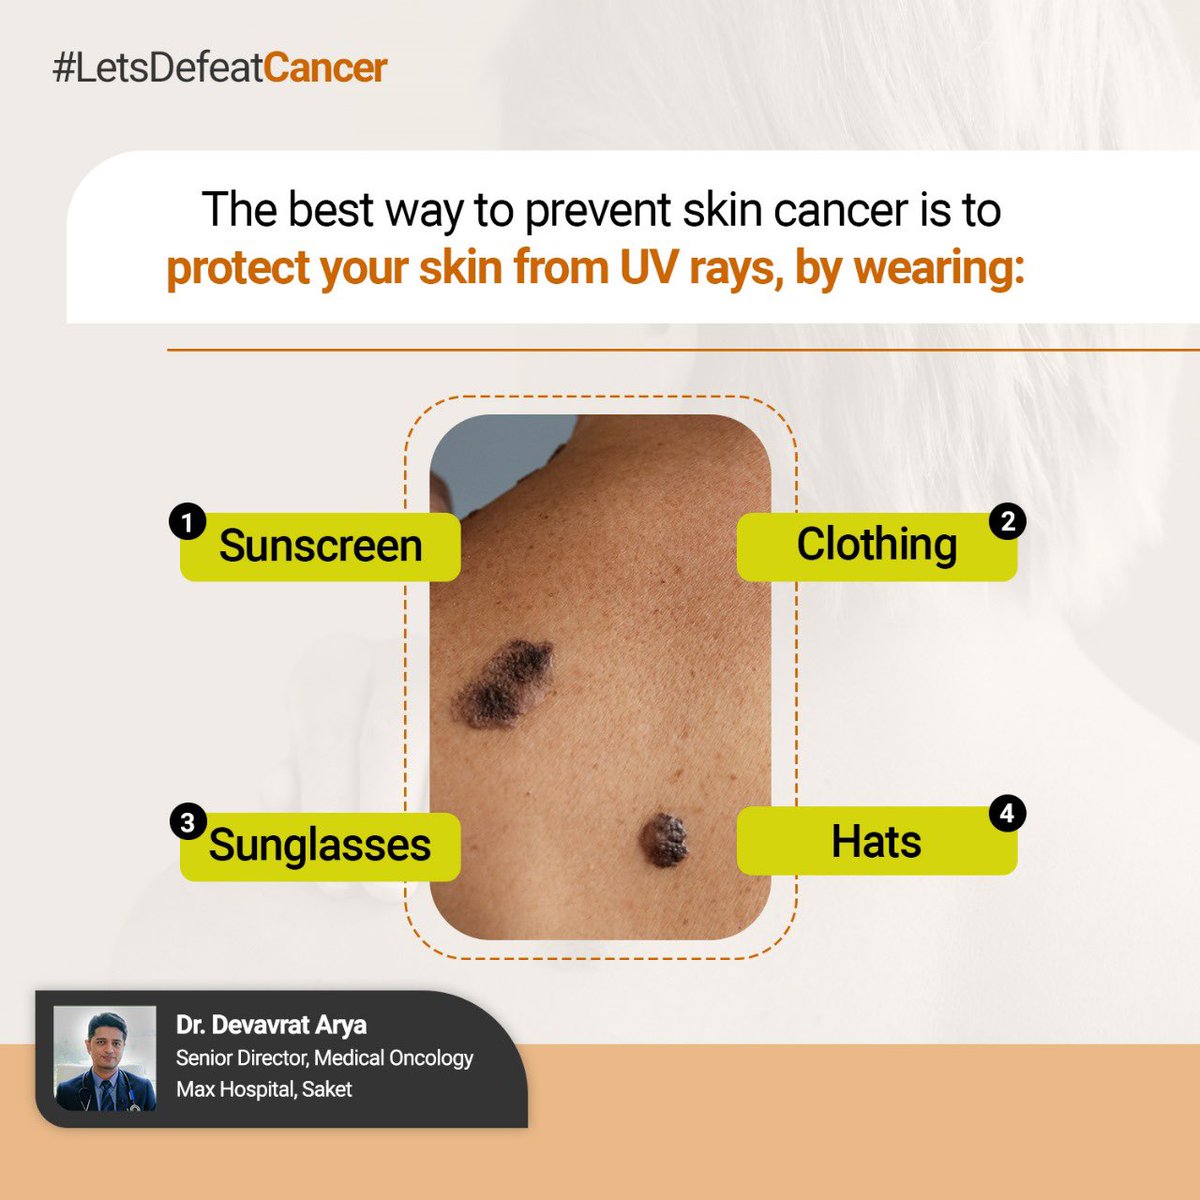 Protect your skin from UV rays to prevent skin cancer: wear sunscreen, seek shade, and cover up! ☀️🧴 

#SkinCancerPrevention #UVSafety #LetsDefeatCancer #DrDevavratArya #endcancer #letsfightcancertogether #LetsBeatCancer #cancerawareness #cancerprevention